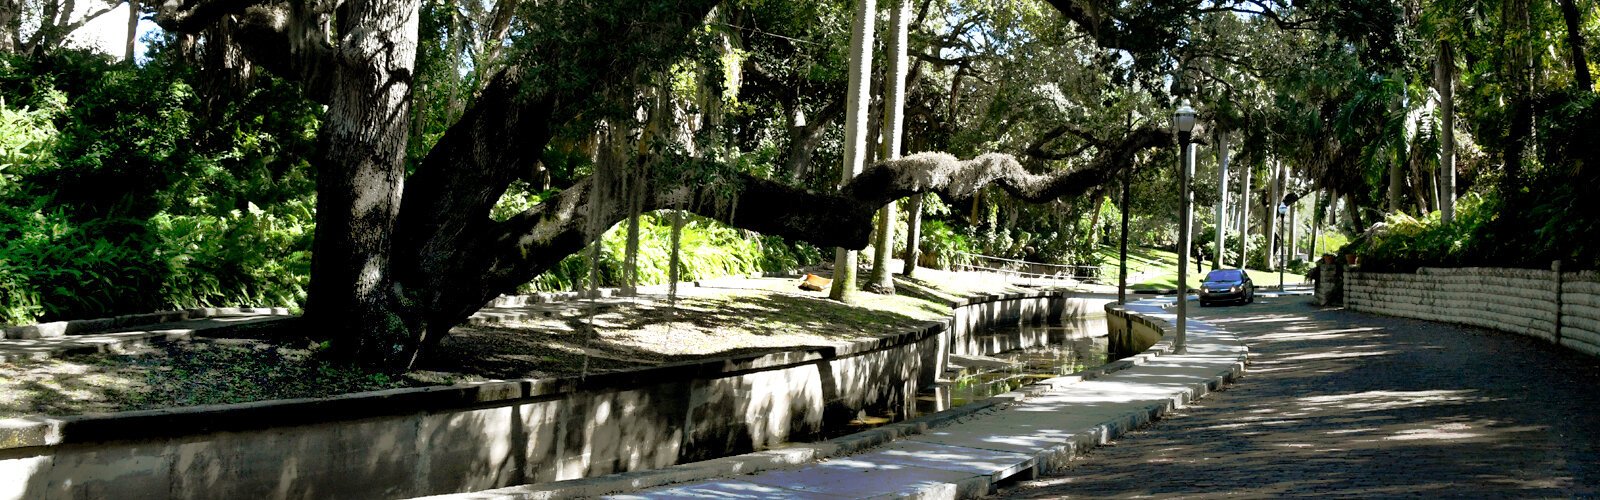 St. Petersburg's Historic Roser Park neighborhood is oriented around Booker Creek and lined with tall royal palm trees and majestic old oaks with low-hanging branches.